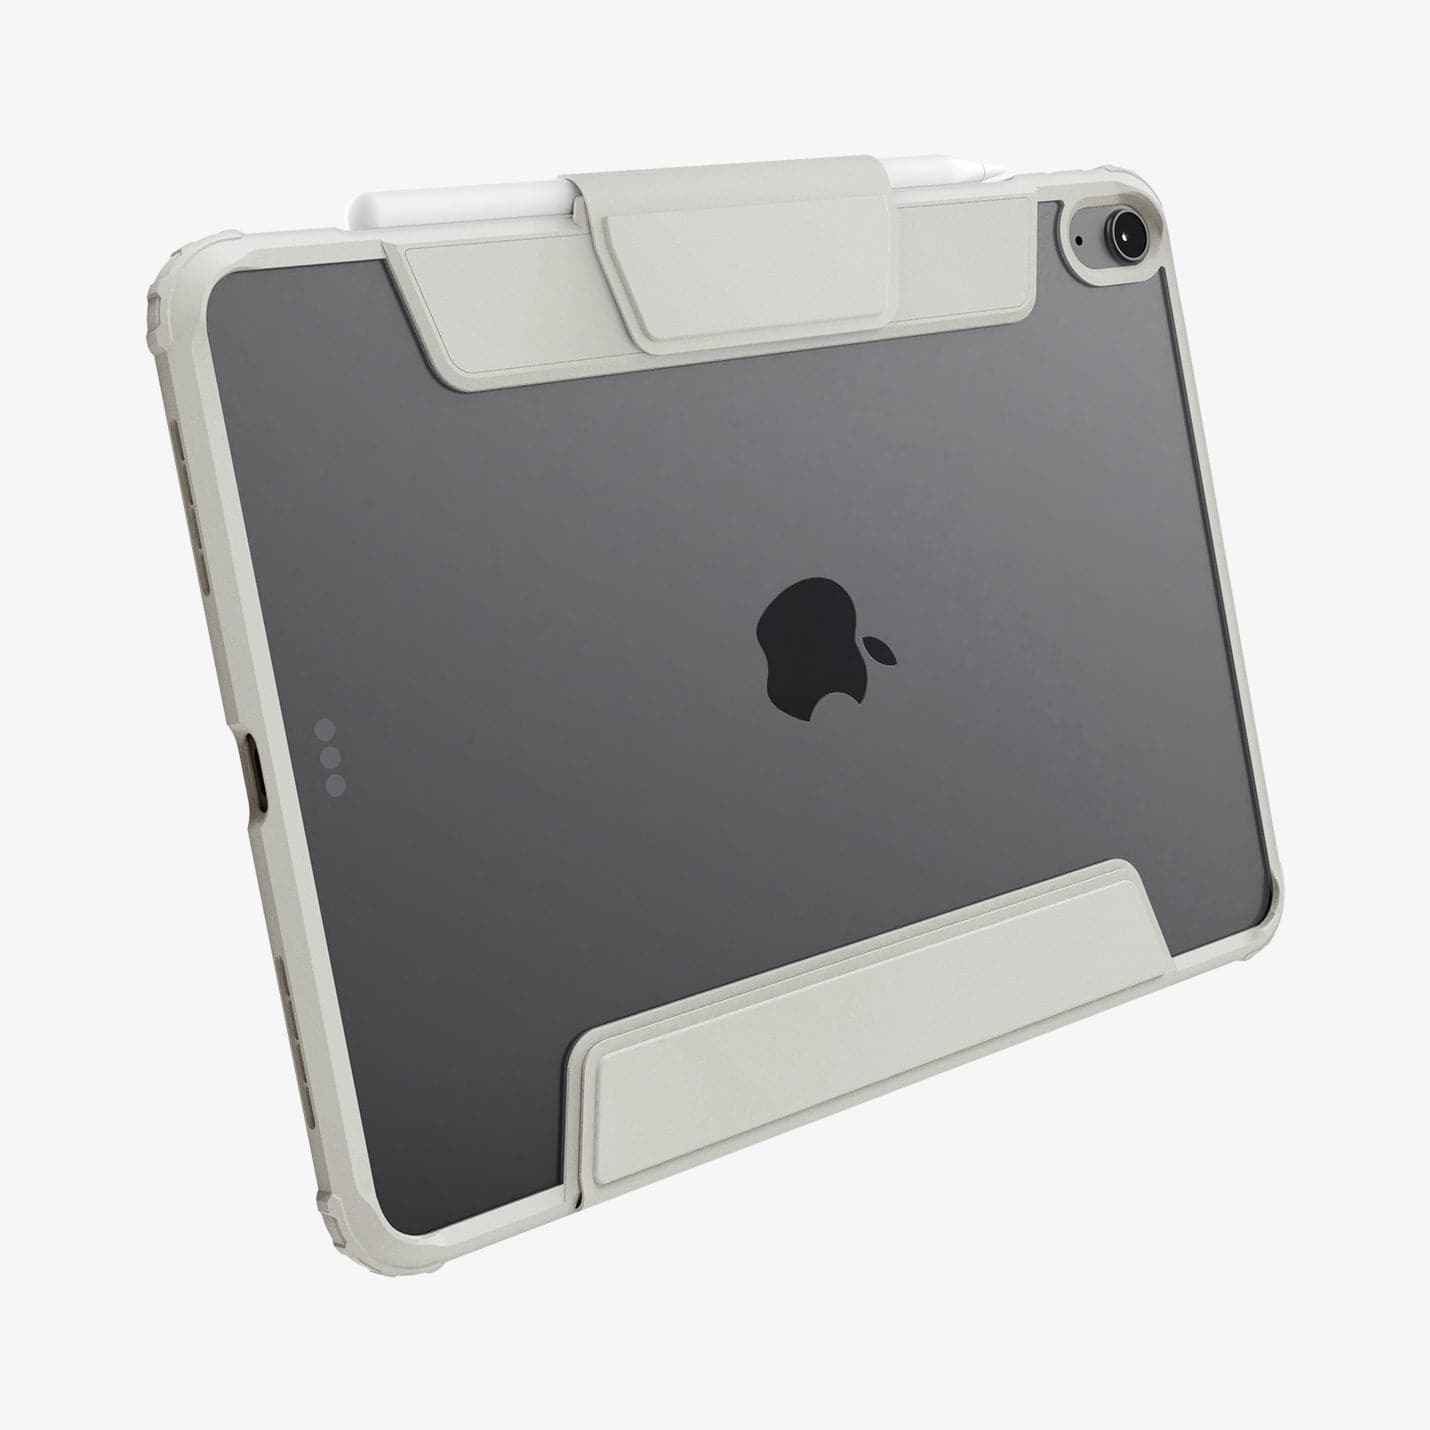 ACS06074 - iPad Air 10.9" Case Air Skin Pro in gray showing the back and partial bottom